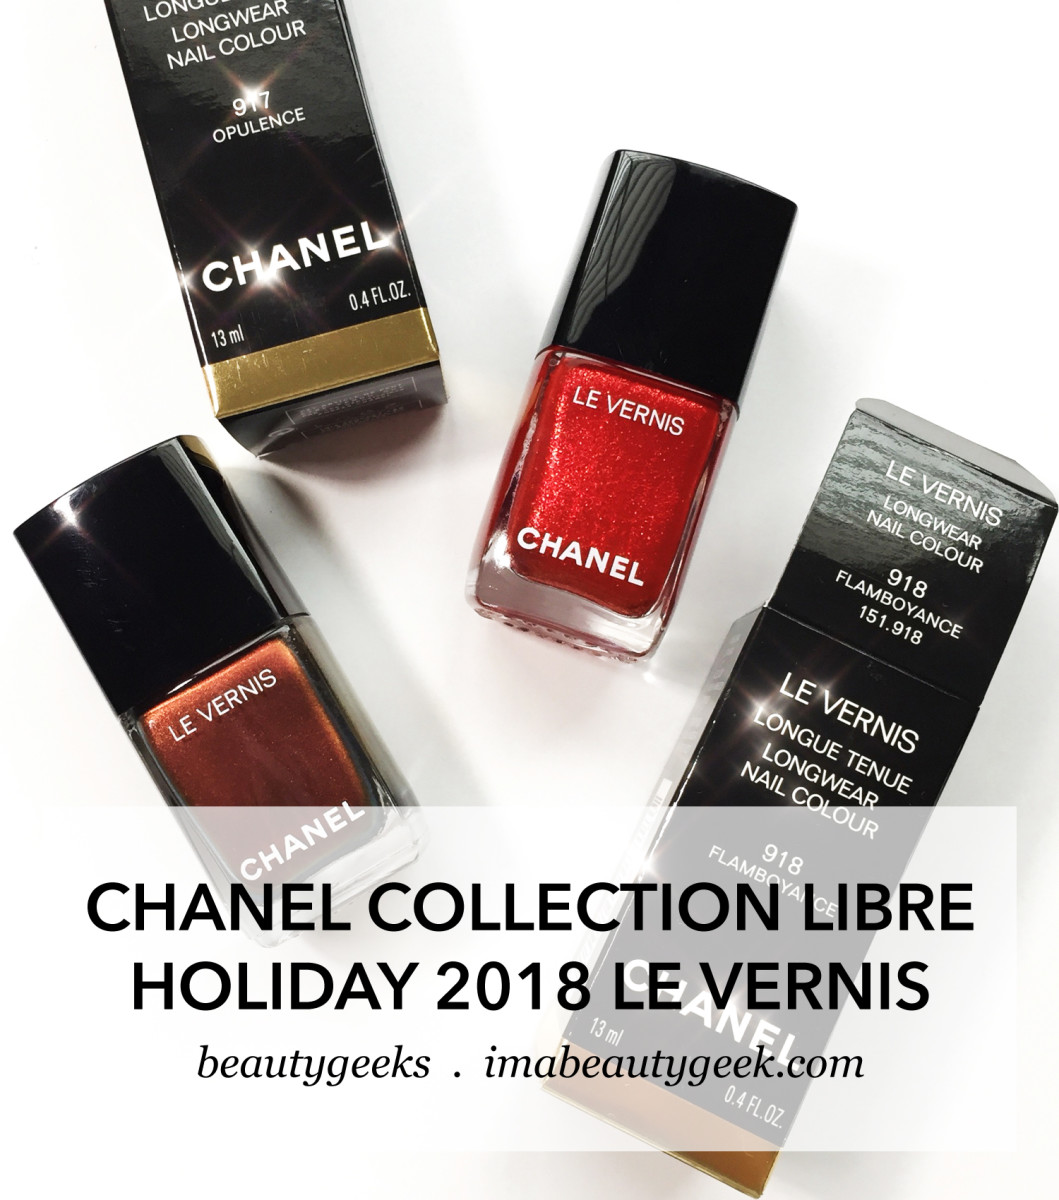 Chanel Collection Libre Holiday 2018 Le Vernis